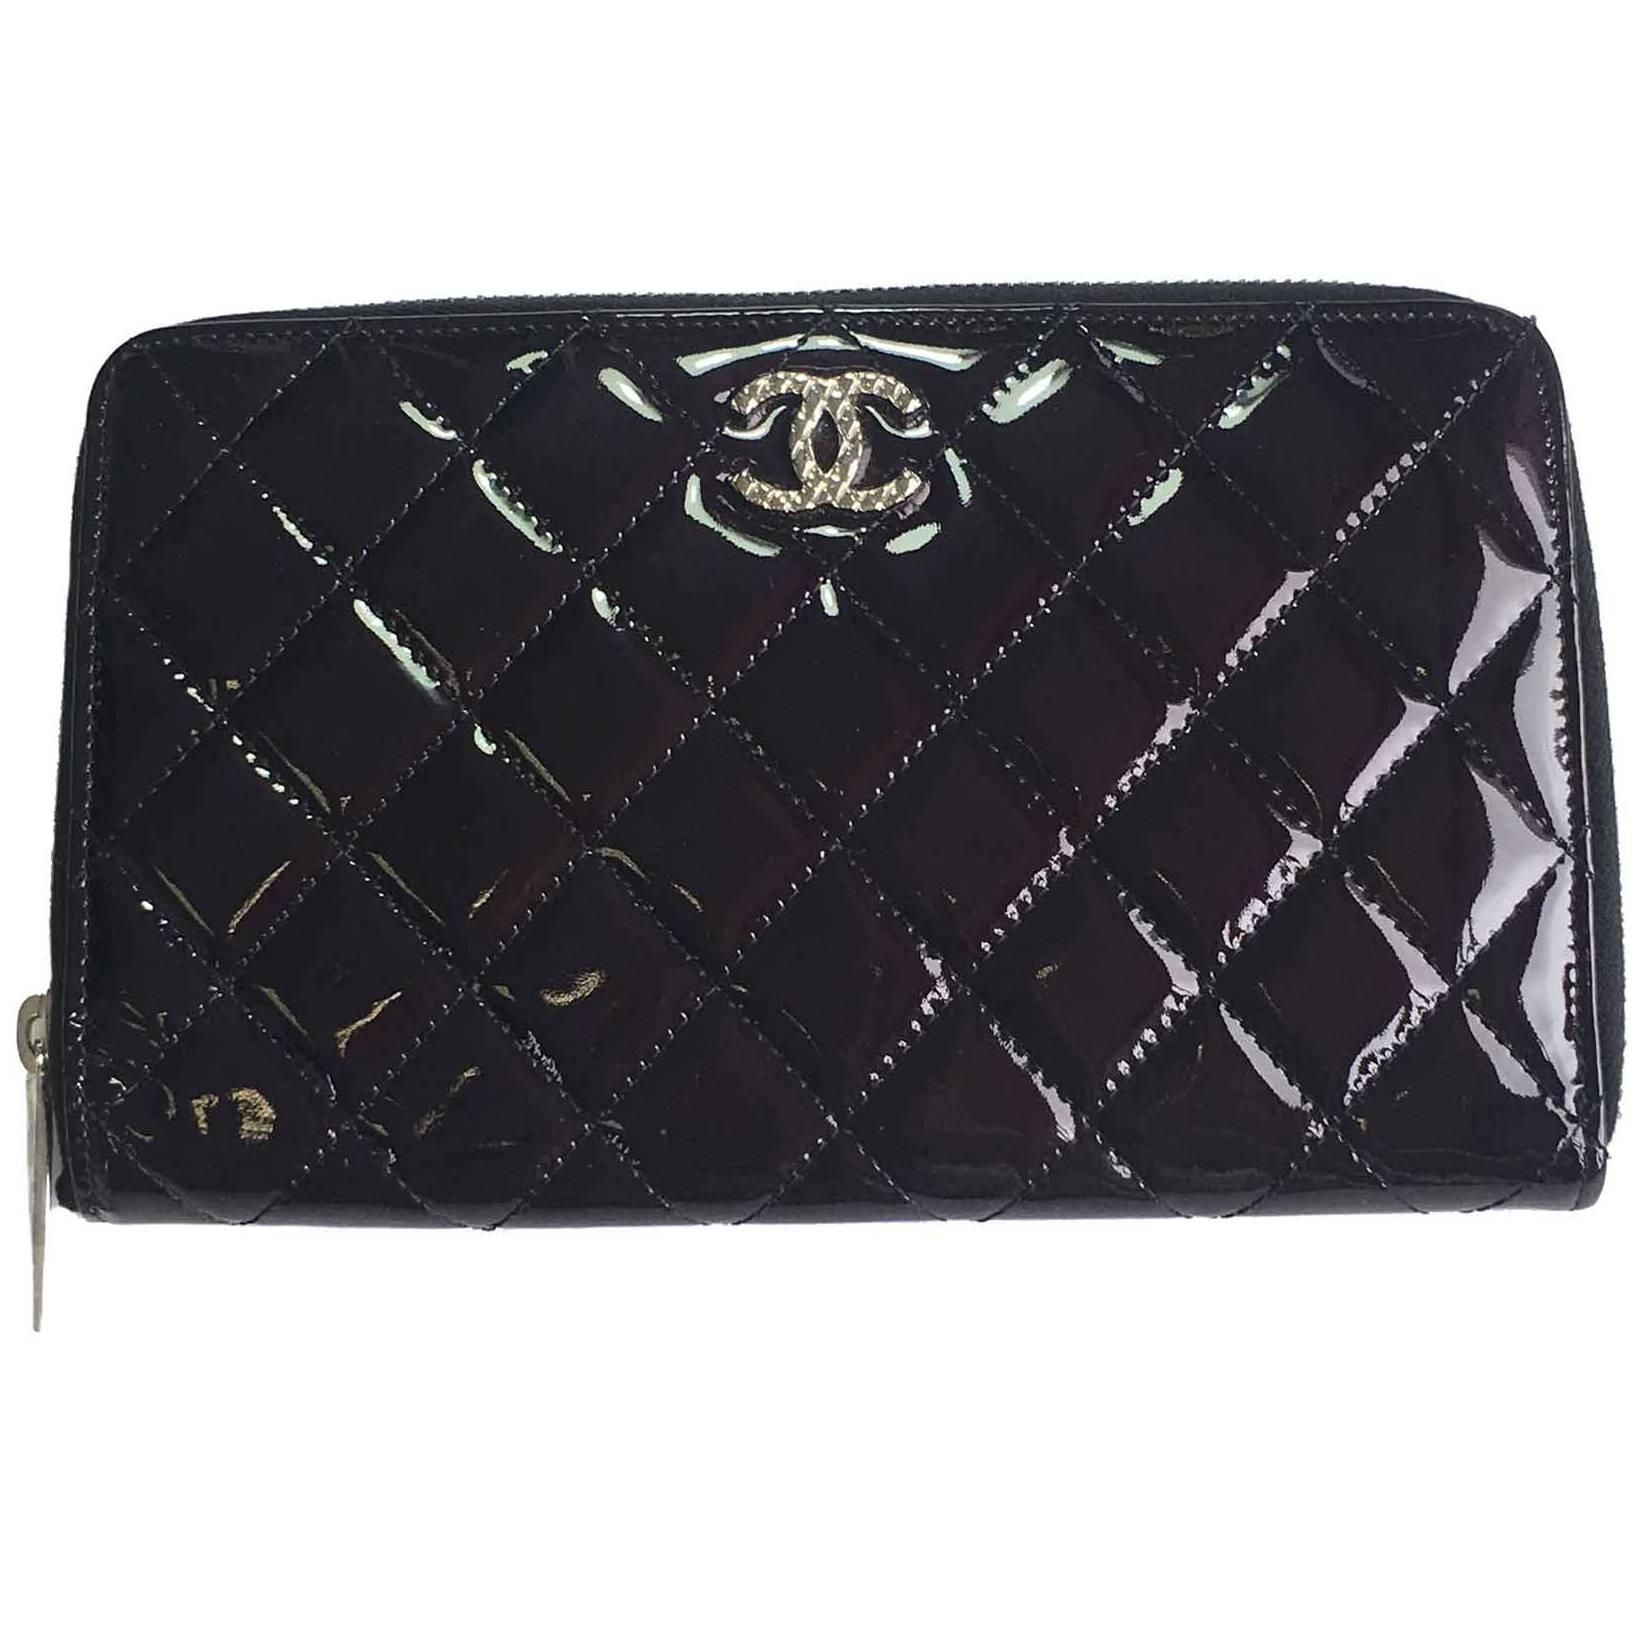 CHANEL Zipped Wallet in Quilted Black Patent Leather